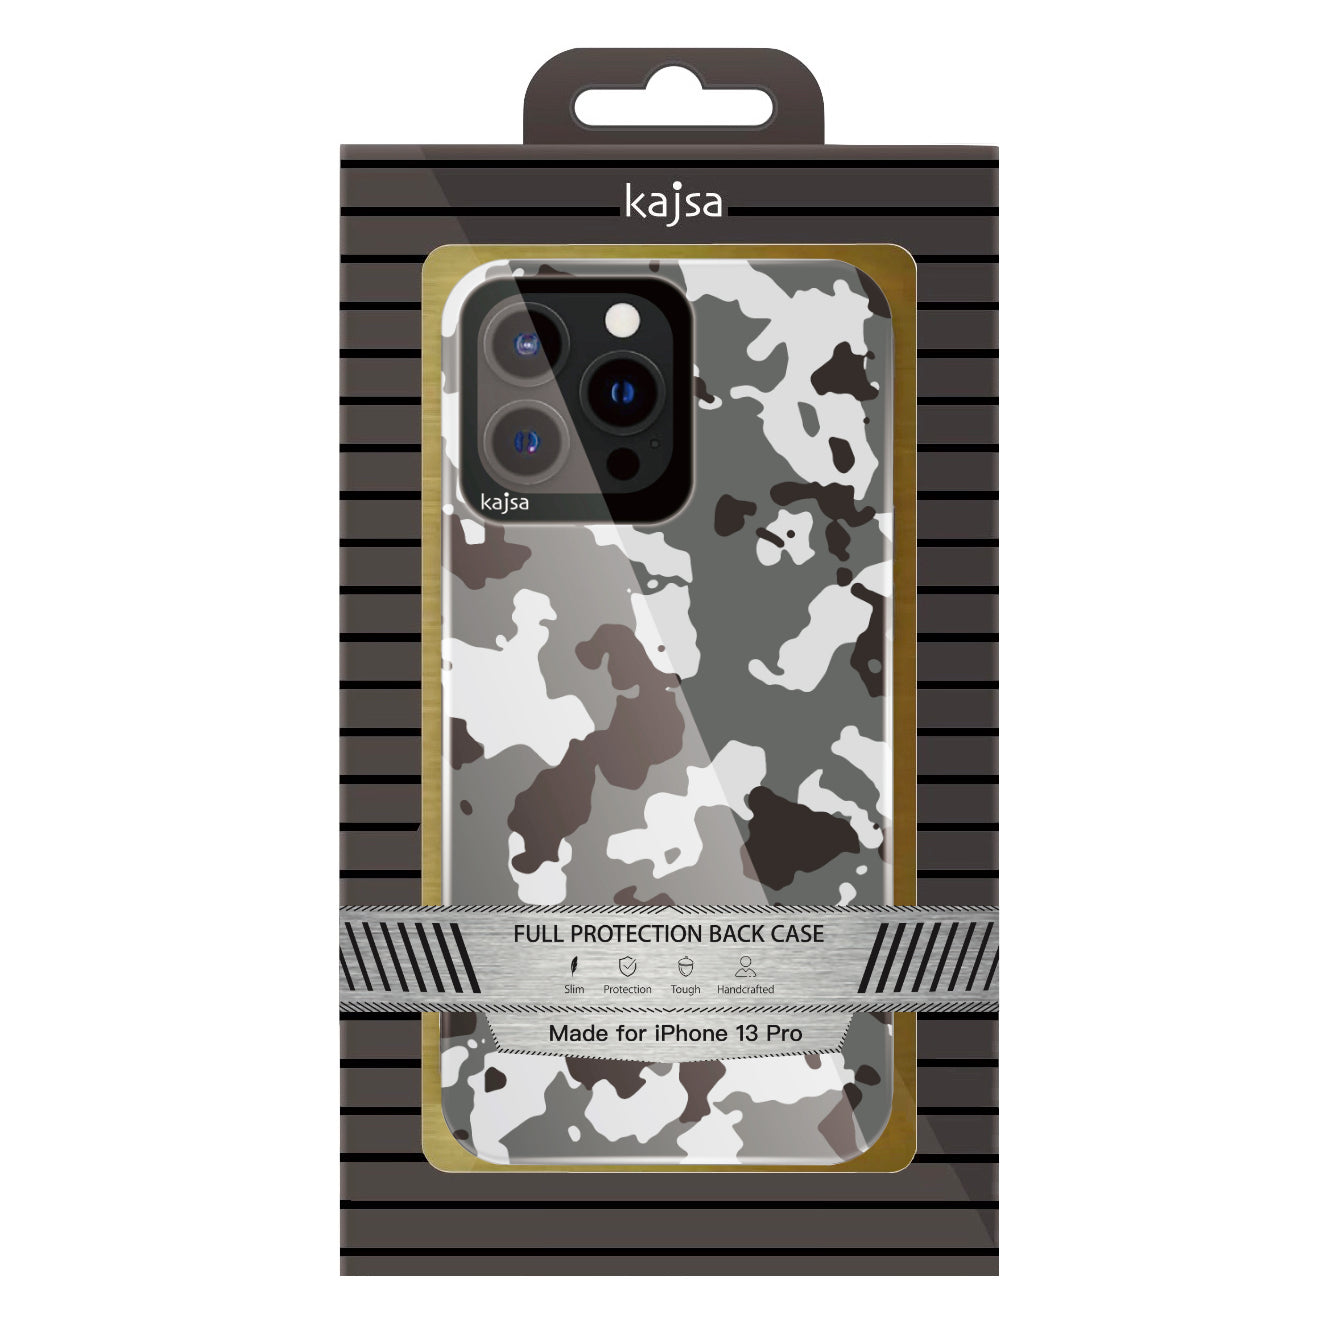 Trans-Shield Collection - Camo Pattern Back Cover for iPhone 13-Phone Case- phone case - phone cases- phone cover- iphone cover- iphone case- iphone cases- leather case- leather cases- DIYCASE - custom case - leather cover - hand strap case - croco pattern case - snake pattern case - carbon fiber phone case - phone case brand - unique phone case - high quality - phone case brand - protective case - buy phone case hong kong - online buy phone case - iphone‎手機殼 - 客製化手機殼 - samsung ‎手機殼 - 香港手機殼 - 買電話殼